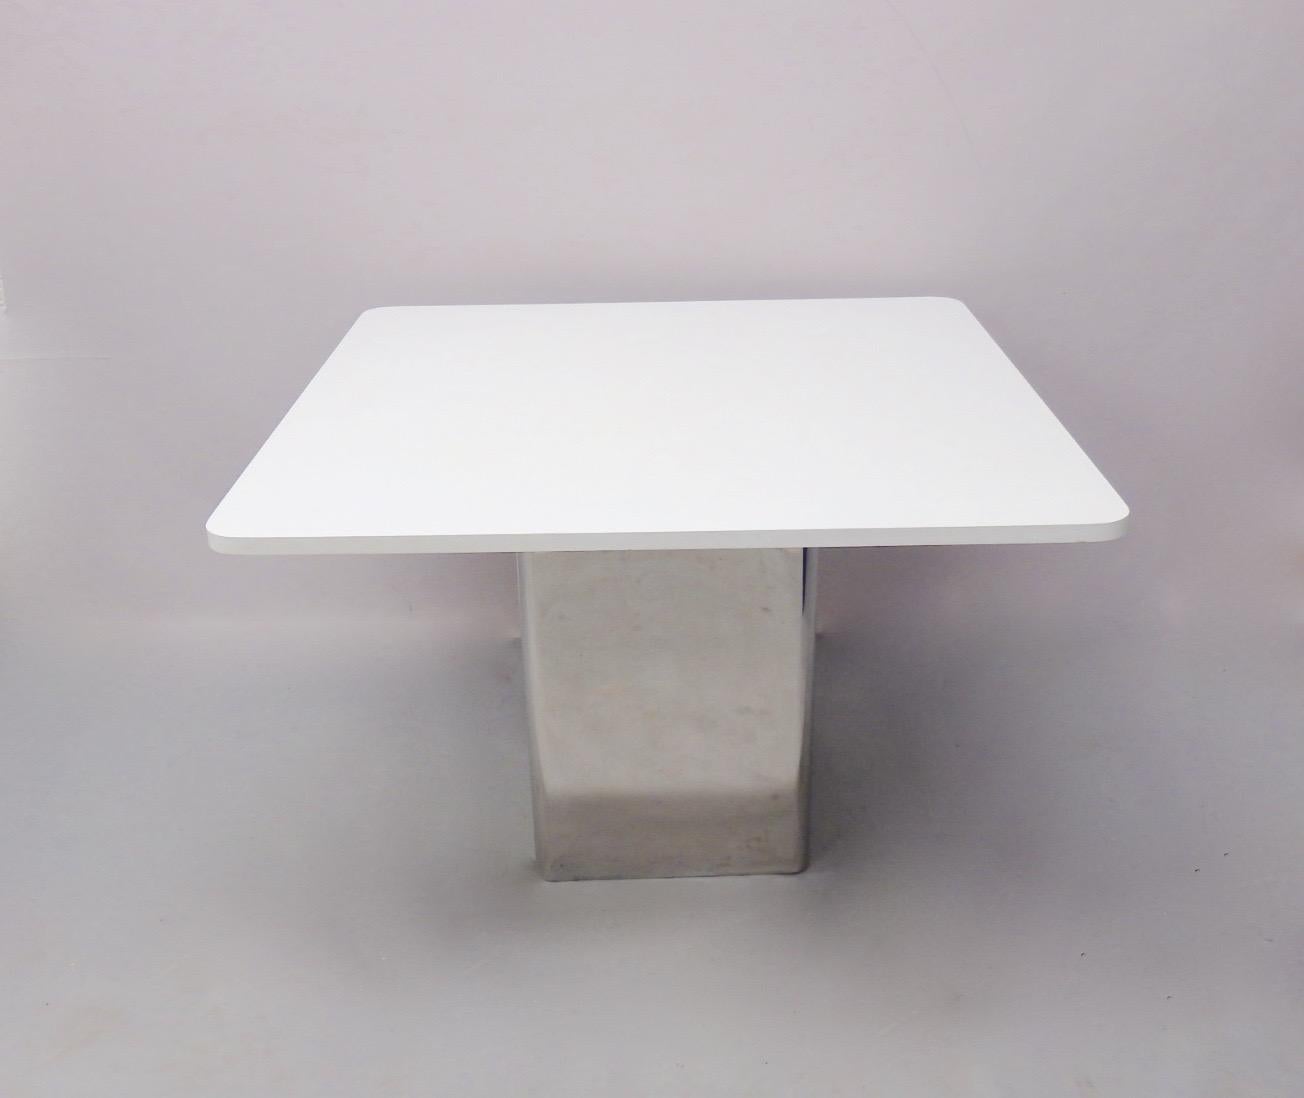 Custom Built Stainless Steel Base Pedestal or Table in Style of Pace In Good Condition For Sale In Ferndale, MI